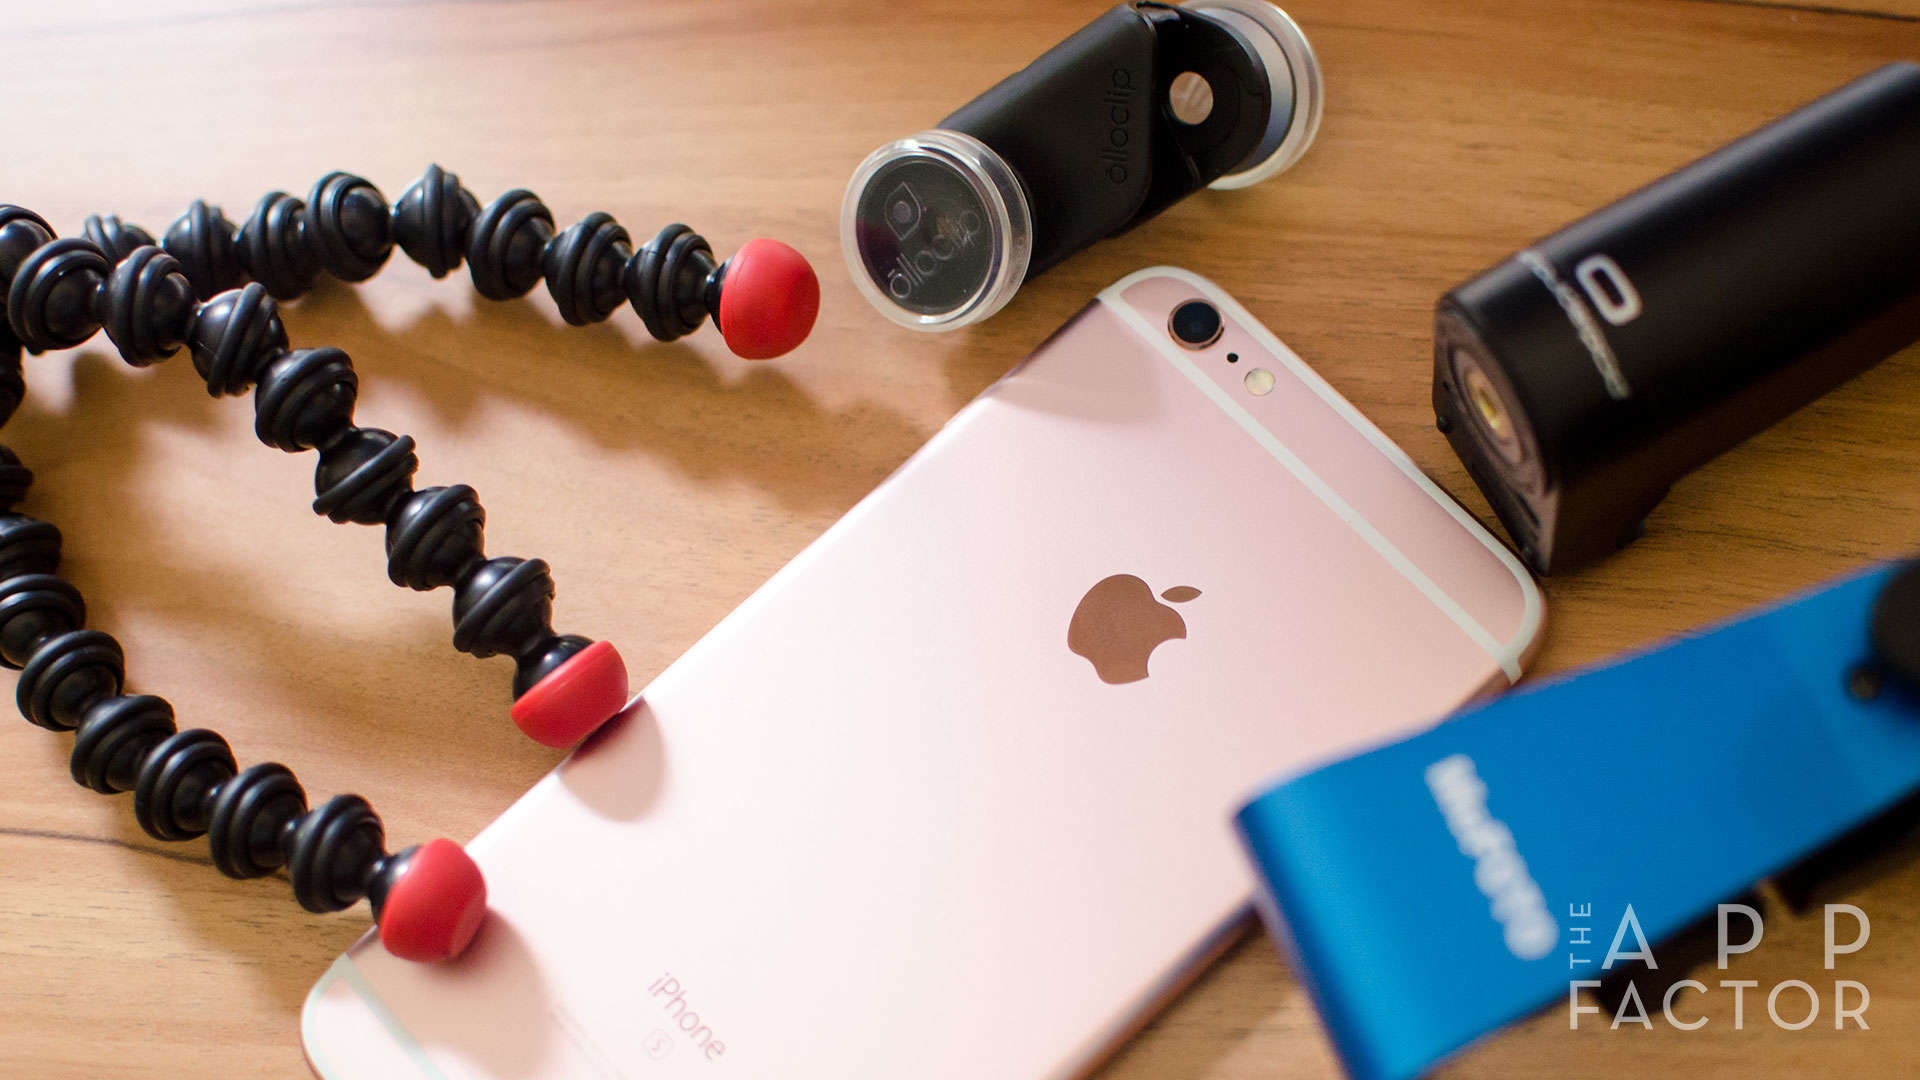 If you want to take your iPhone photography to the next level, these accessories will help you get the job done.